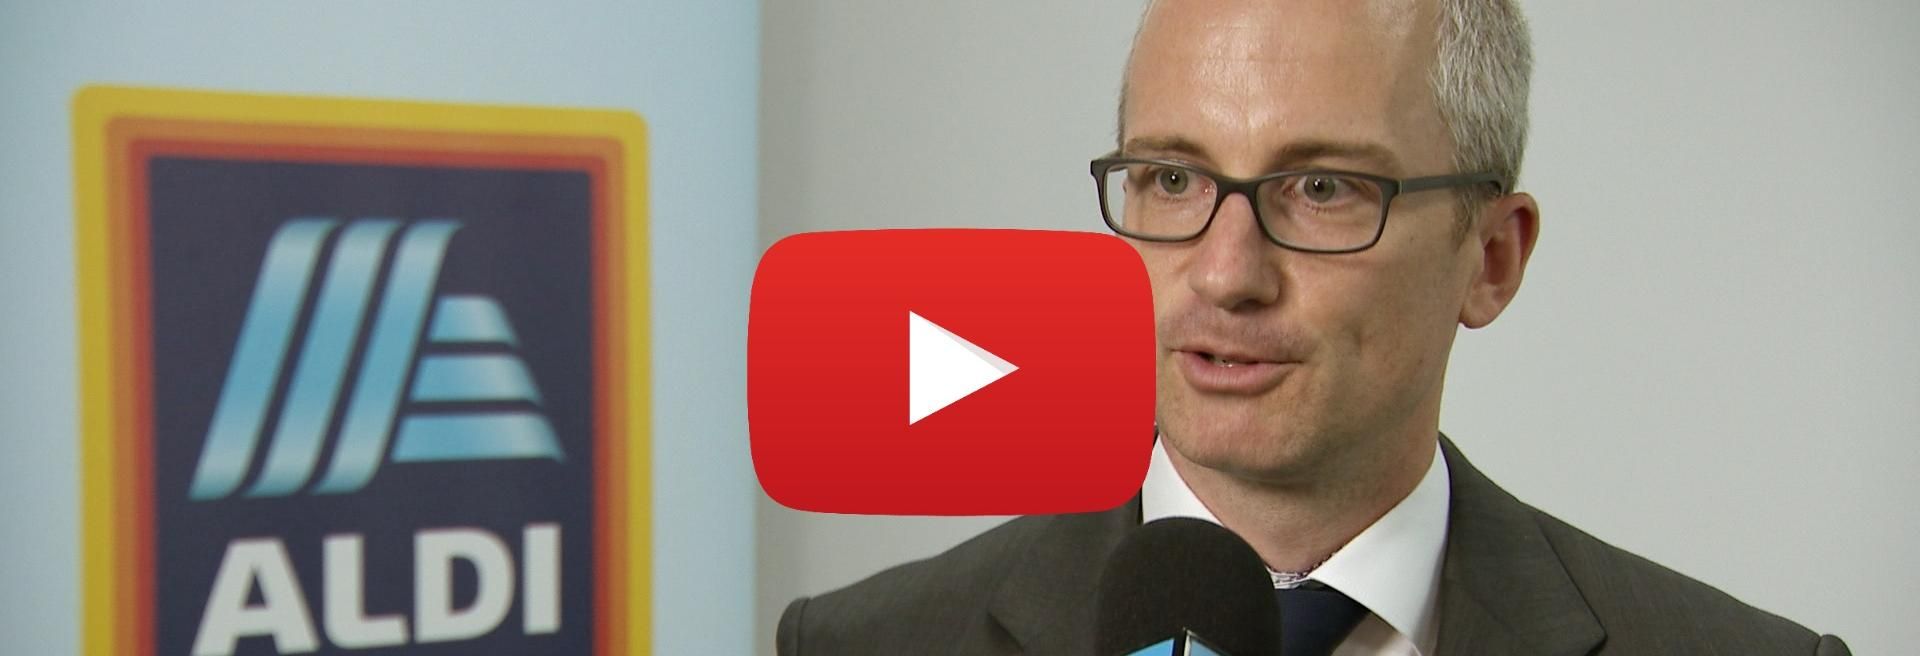 ALDI coordinates the substantial part of its European IT network from Pécs - VIDEO REPORT